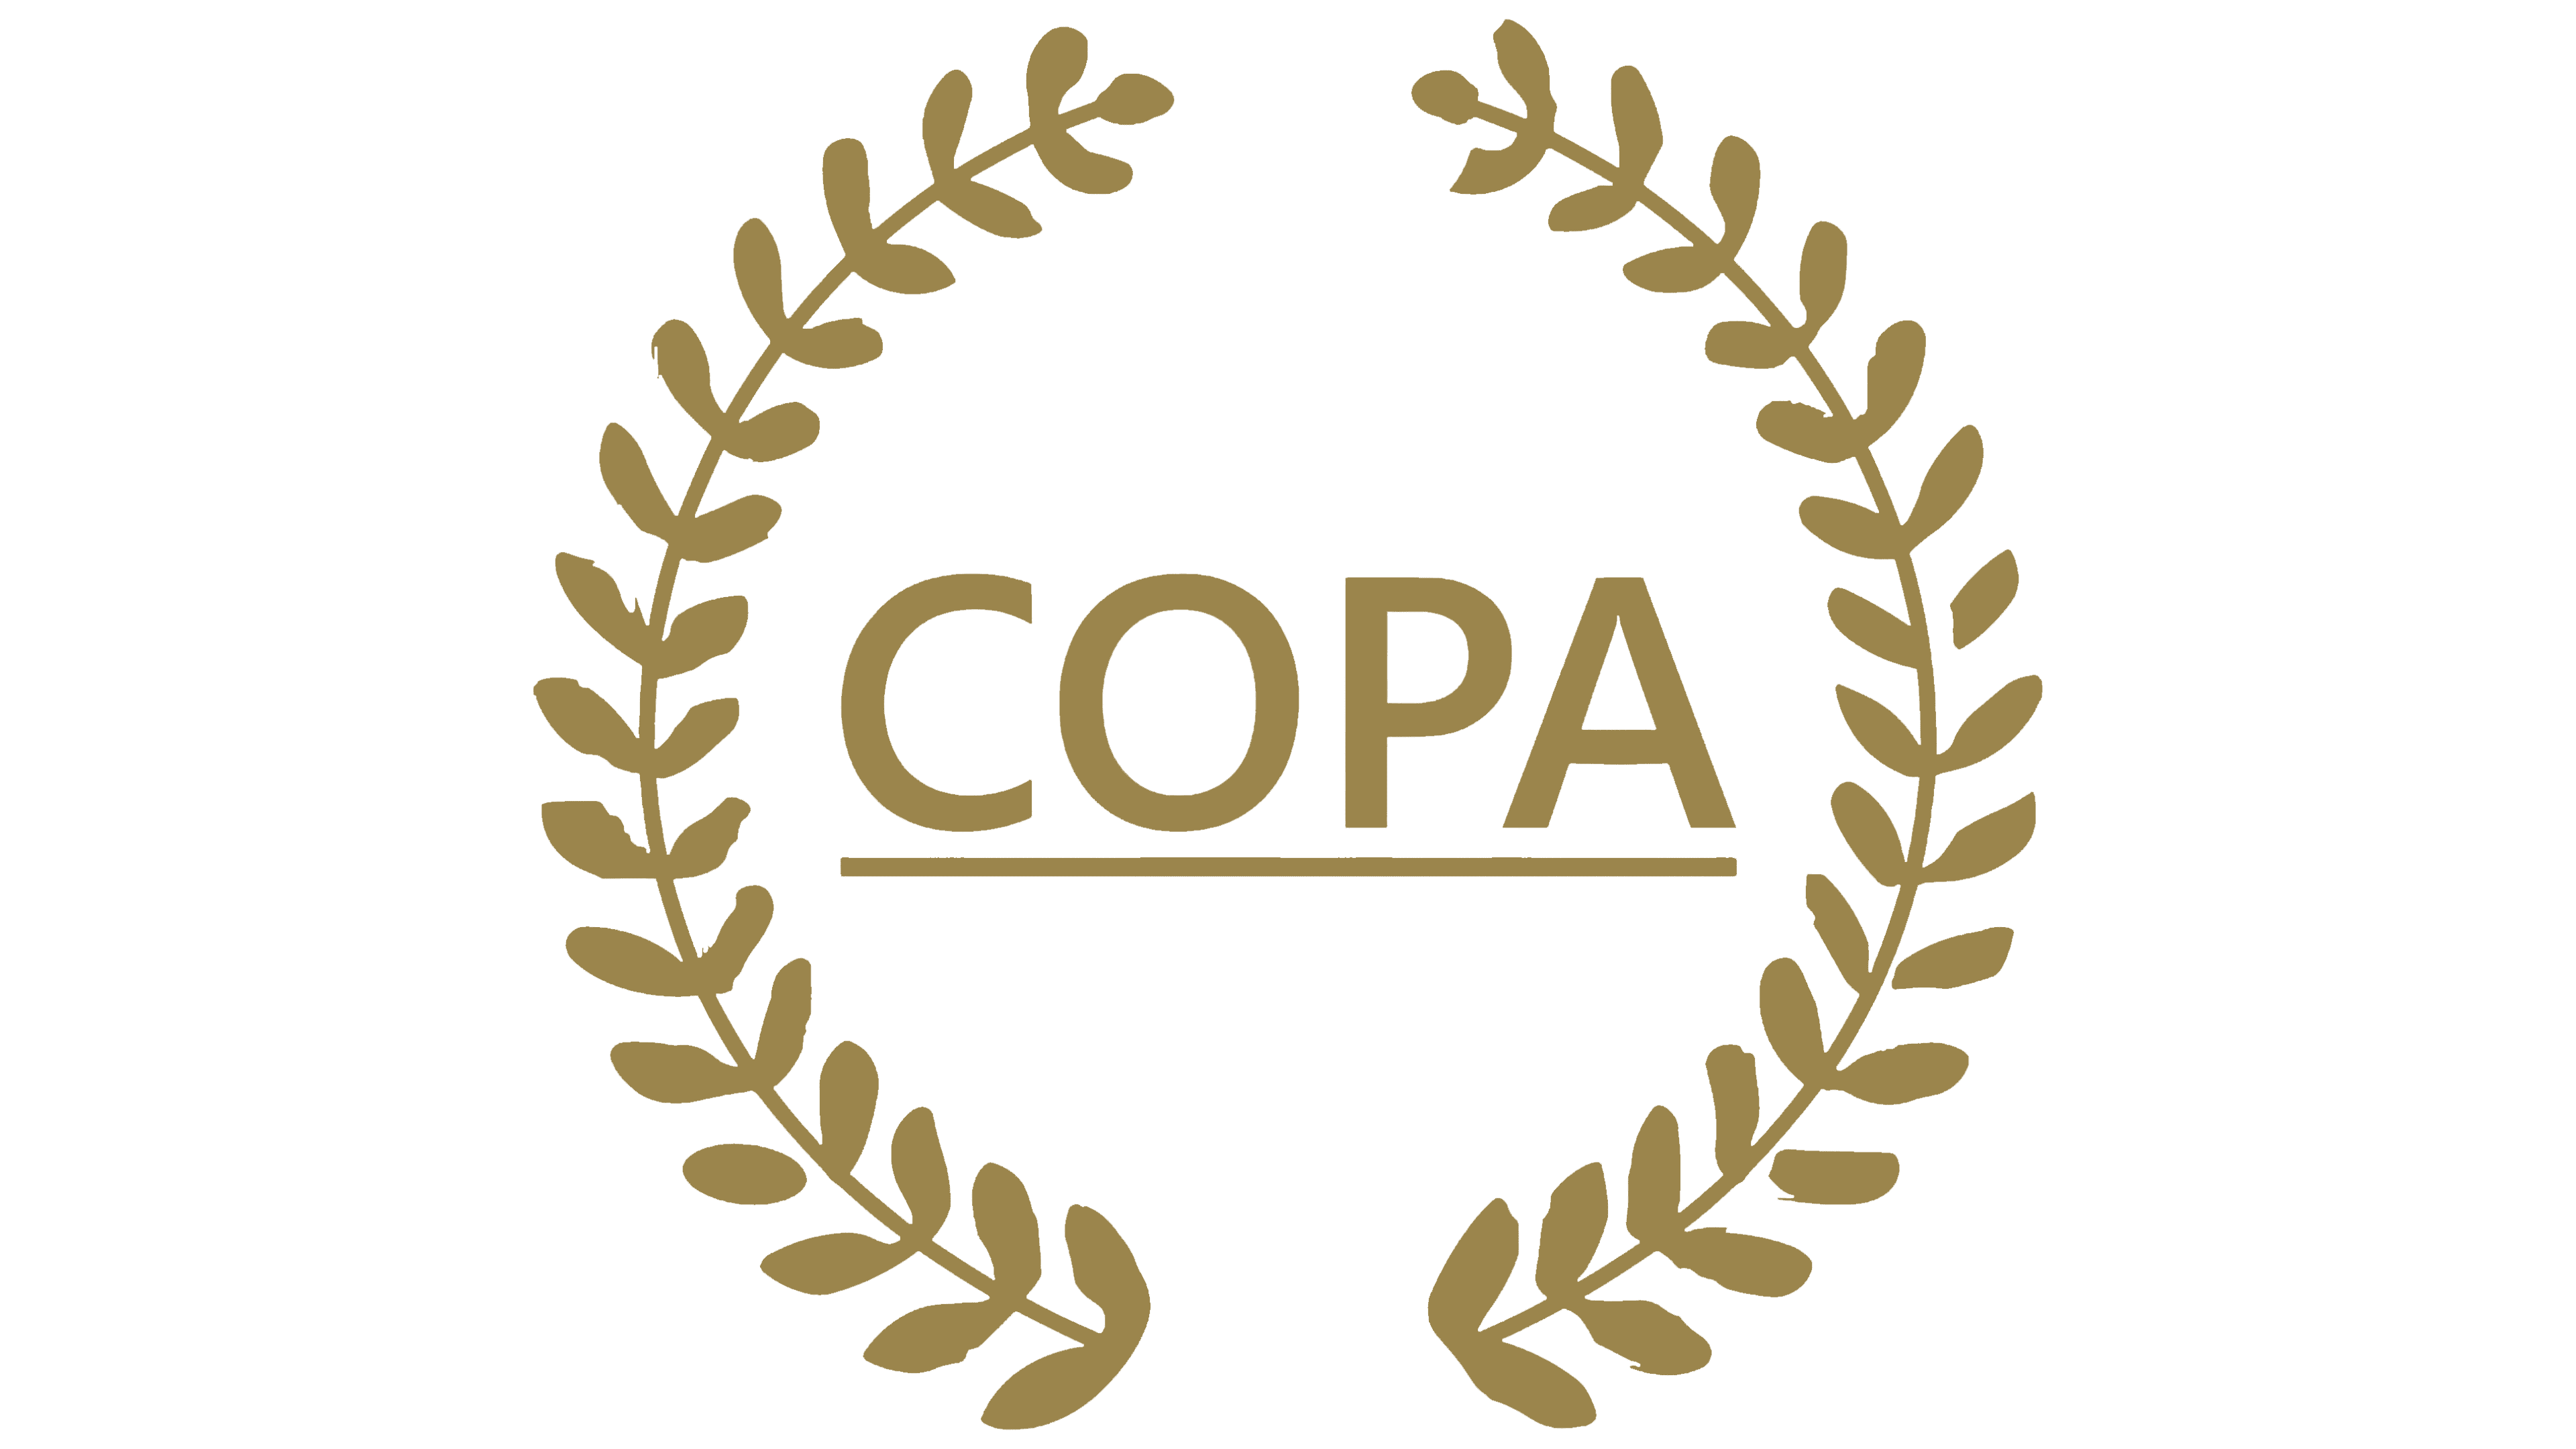 Copa Airlines Logo, symbol, meaning, history, PNG, brand